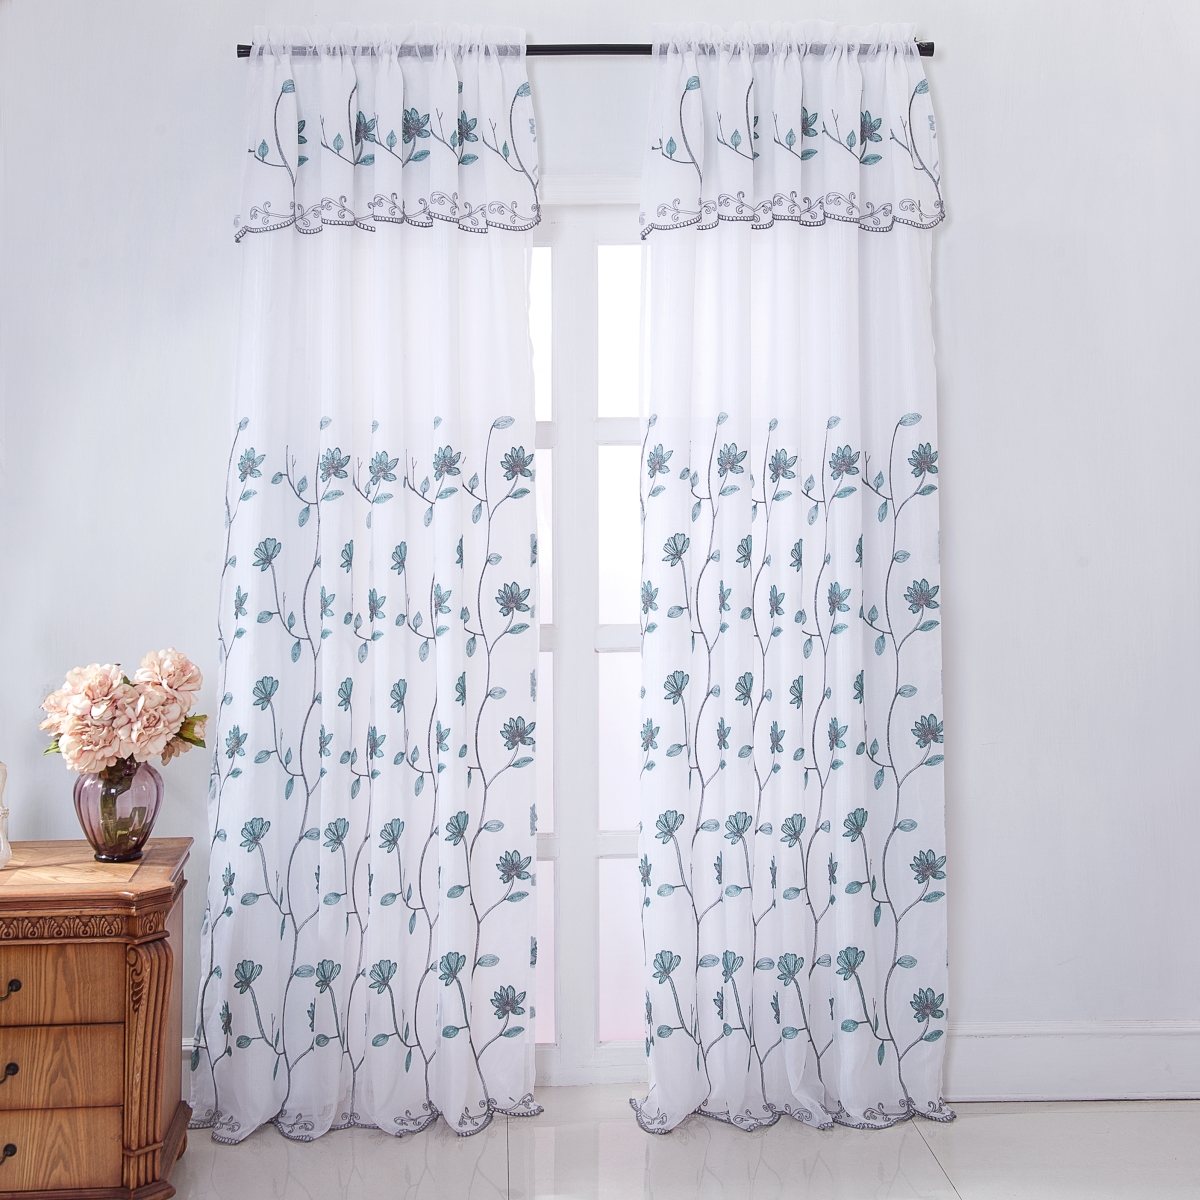 Pnr19291 Ruby Floral Embroidered Rod Pocket Single Curtain Panel In Teal - 54 X 90 In.